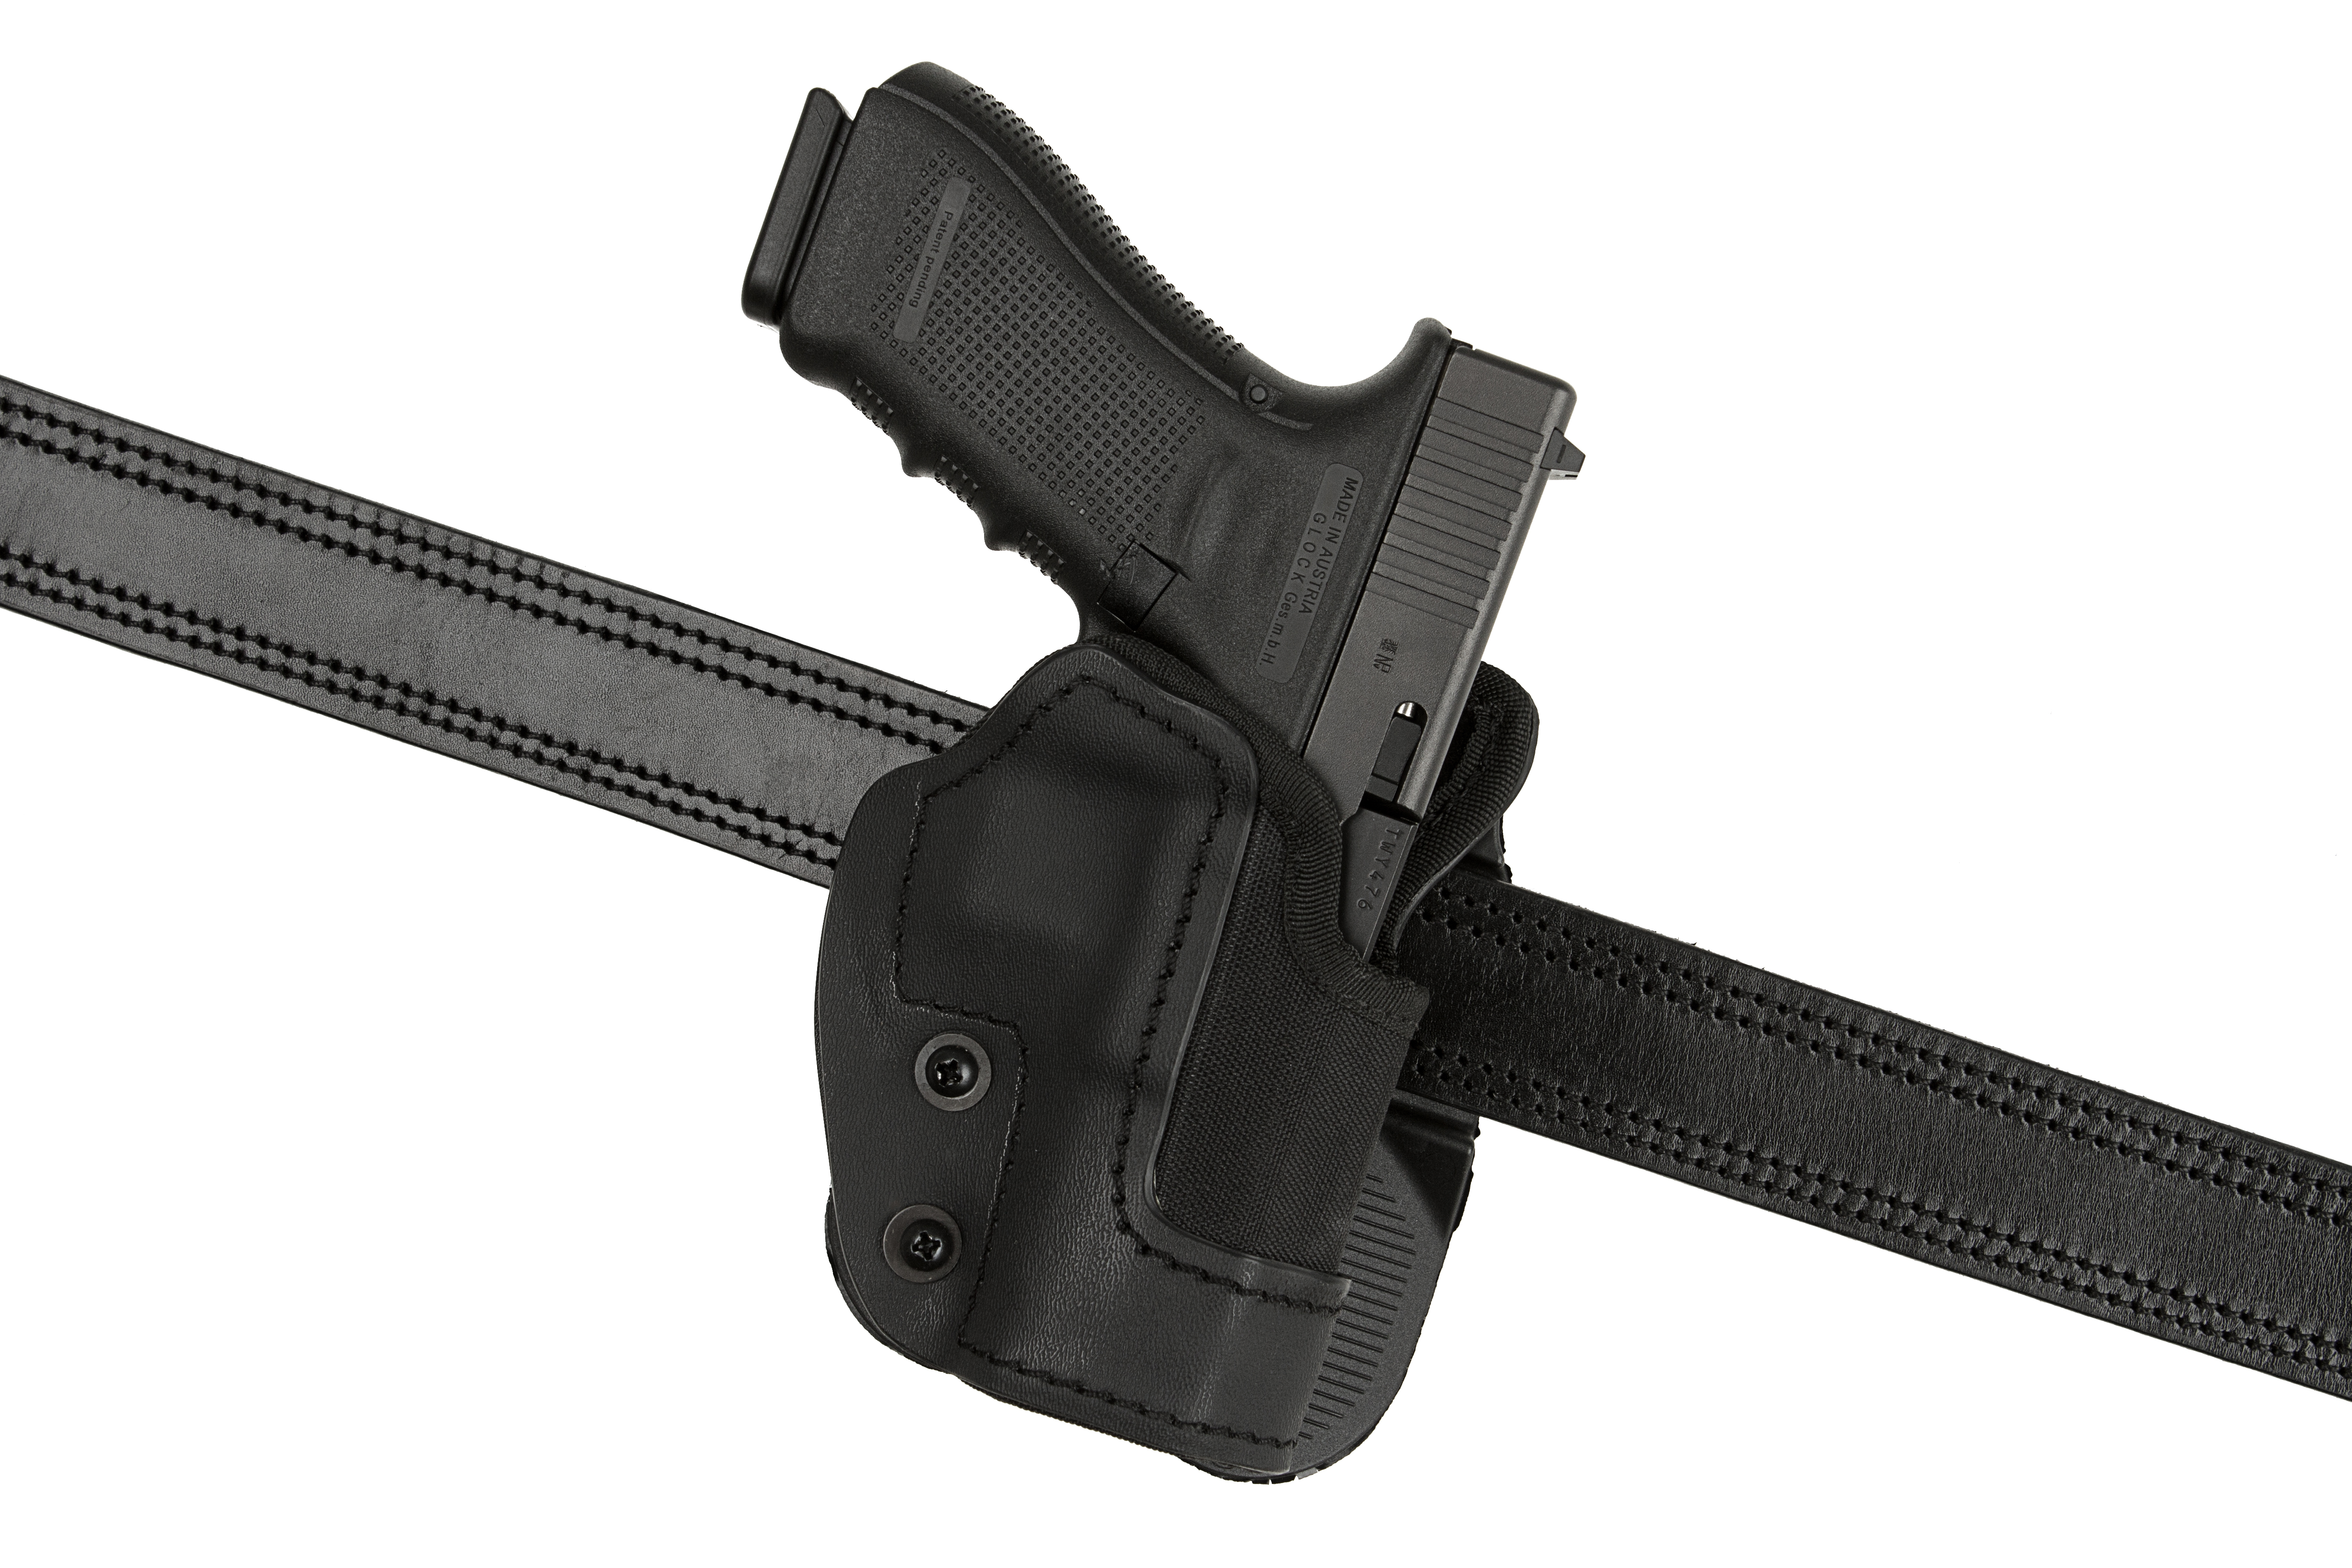  IMI-Defense Retention Roto Holster Sig Sauer SIG Pro Sp2022/sp2009  Black : Gun Holsters : Sports & Outdoors